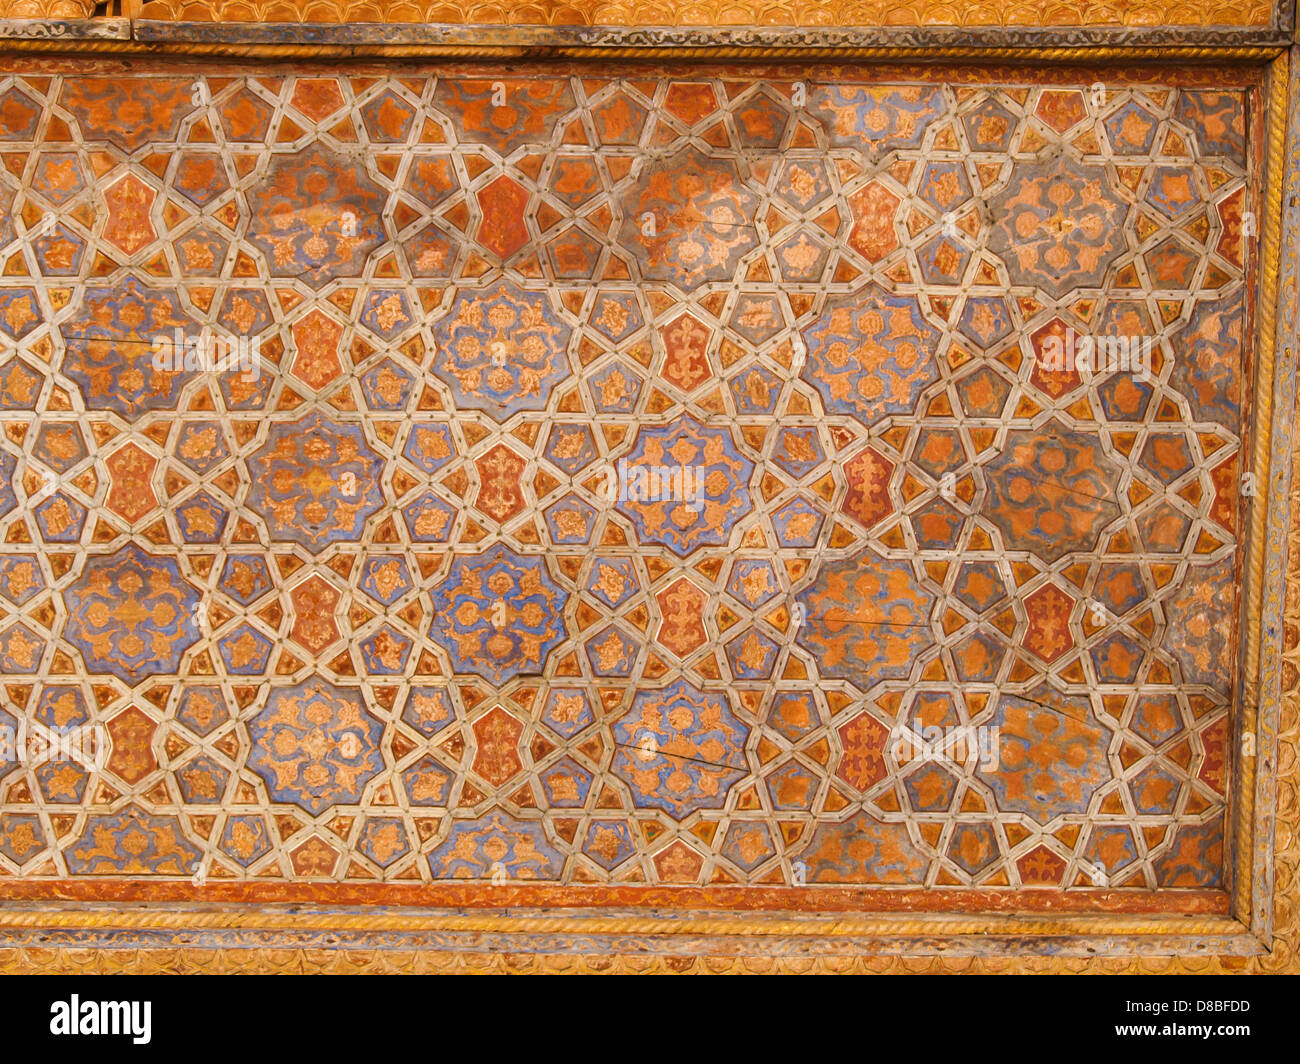 Islamic pattern on wooden ceiling decoration in Chehel Sotoun (Sotoon) Palace built by Shah Abbas II, Isfahan, Iran Stock Photo